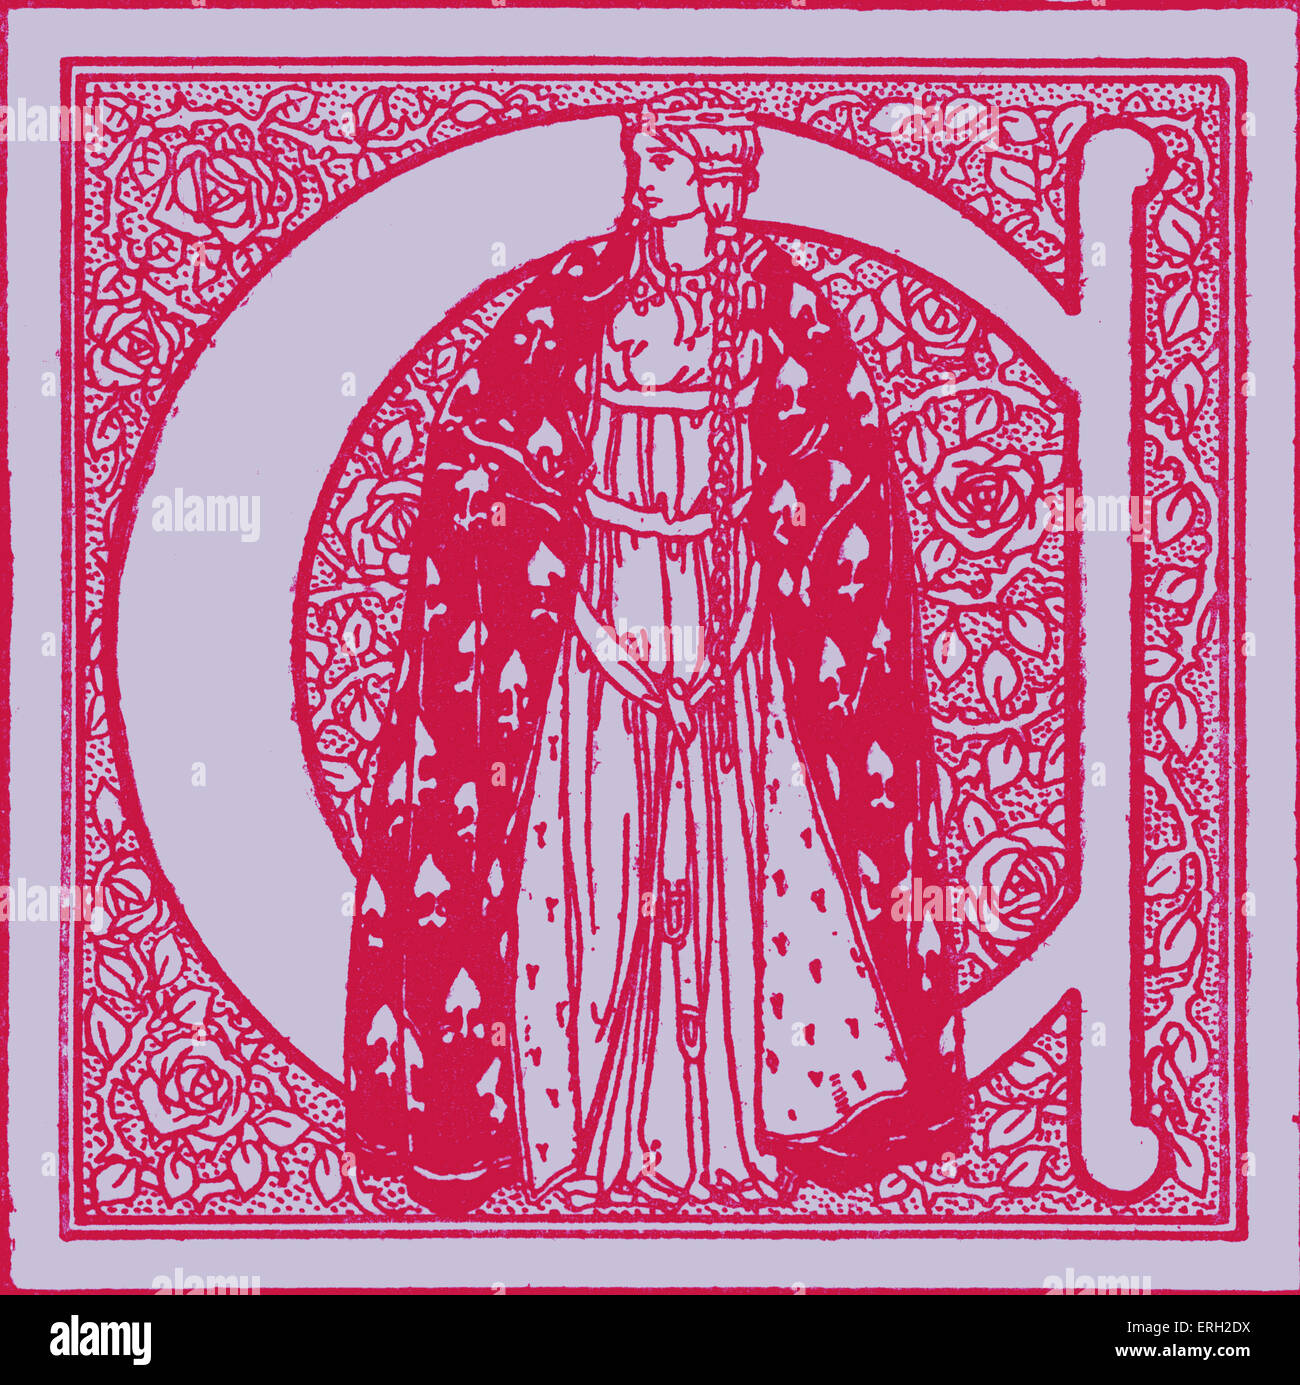 Illuminated letter 'C ' - from The Romance of Tristram and Iseut. Illustration by Maurice Lalau. Published 1910. Stock Photo